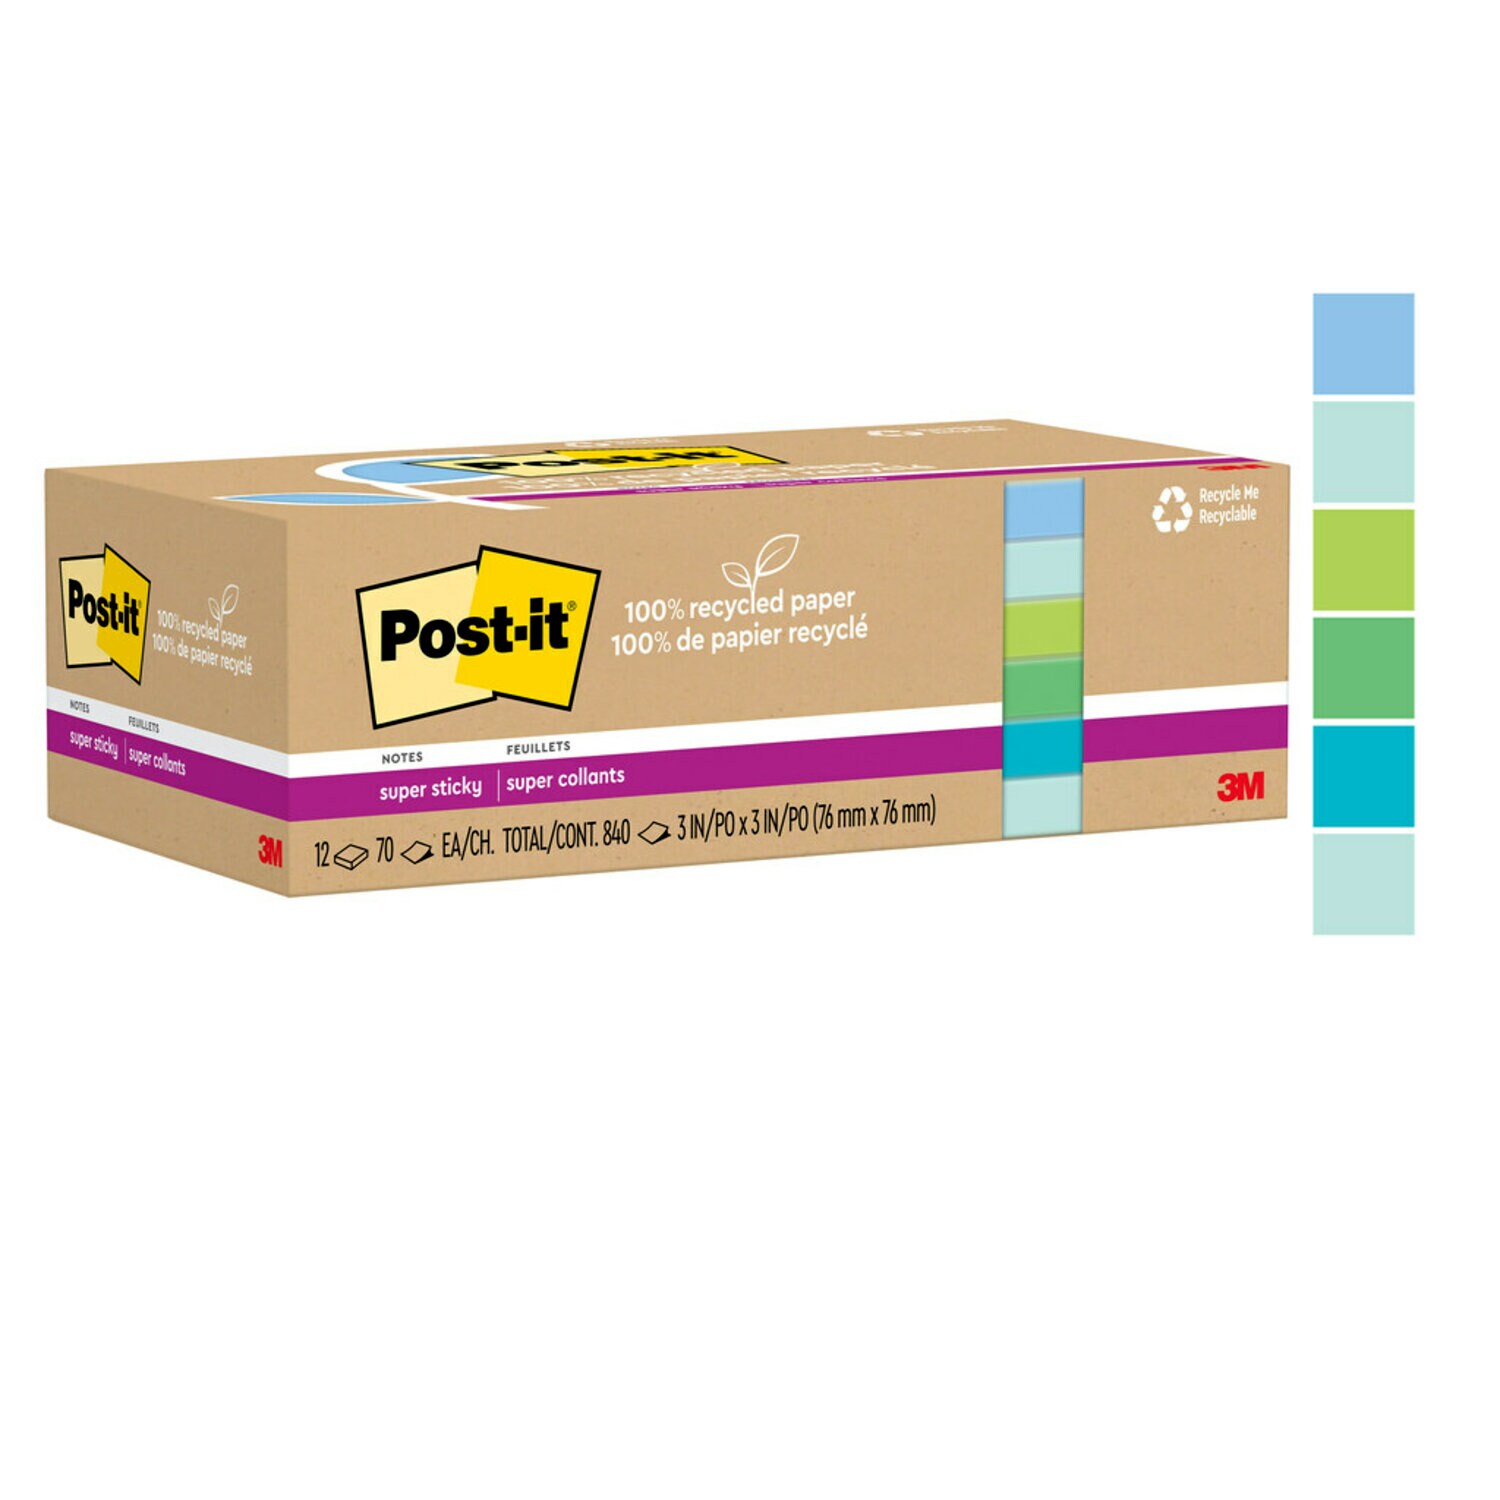 7100290284 - Post-it Super Sticky Recycled Notes 654R-12SST, 3 in x 3 in (76 mm x 76 mm)